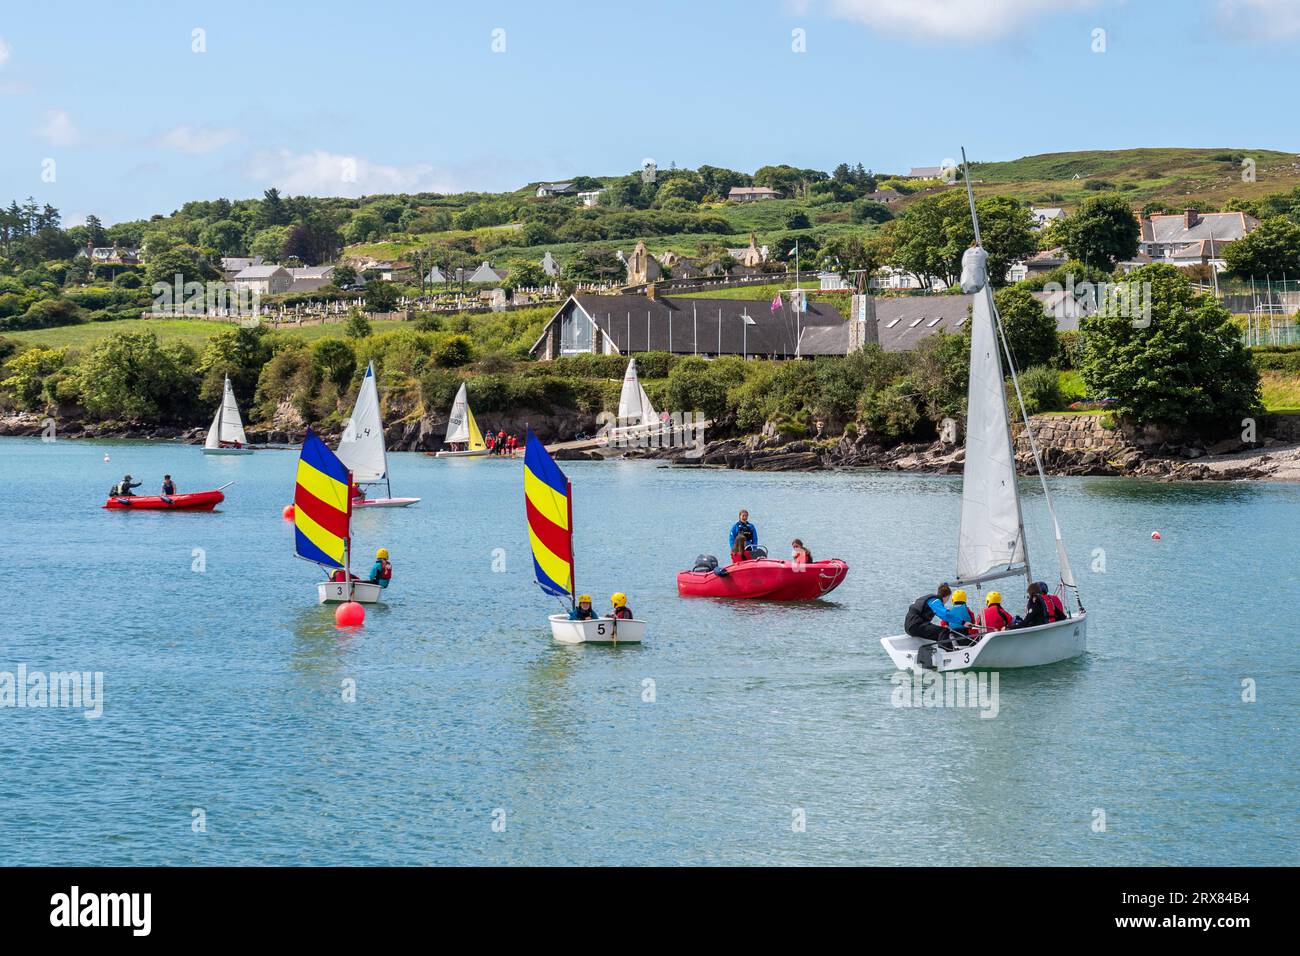 Kids learning to sail at Schull Community College sailing school, Schull, West Cork, Ireland. Stock Photo